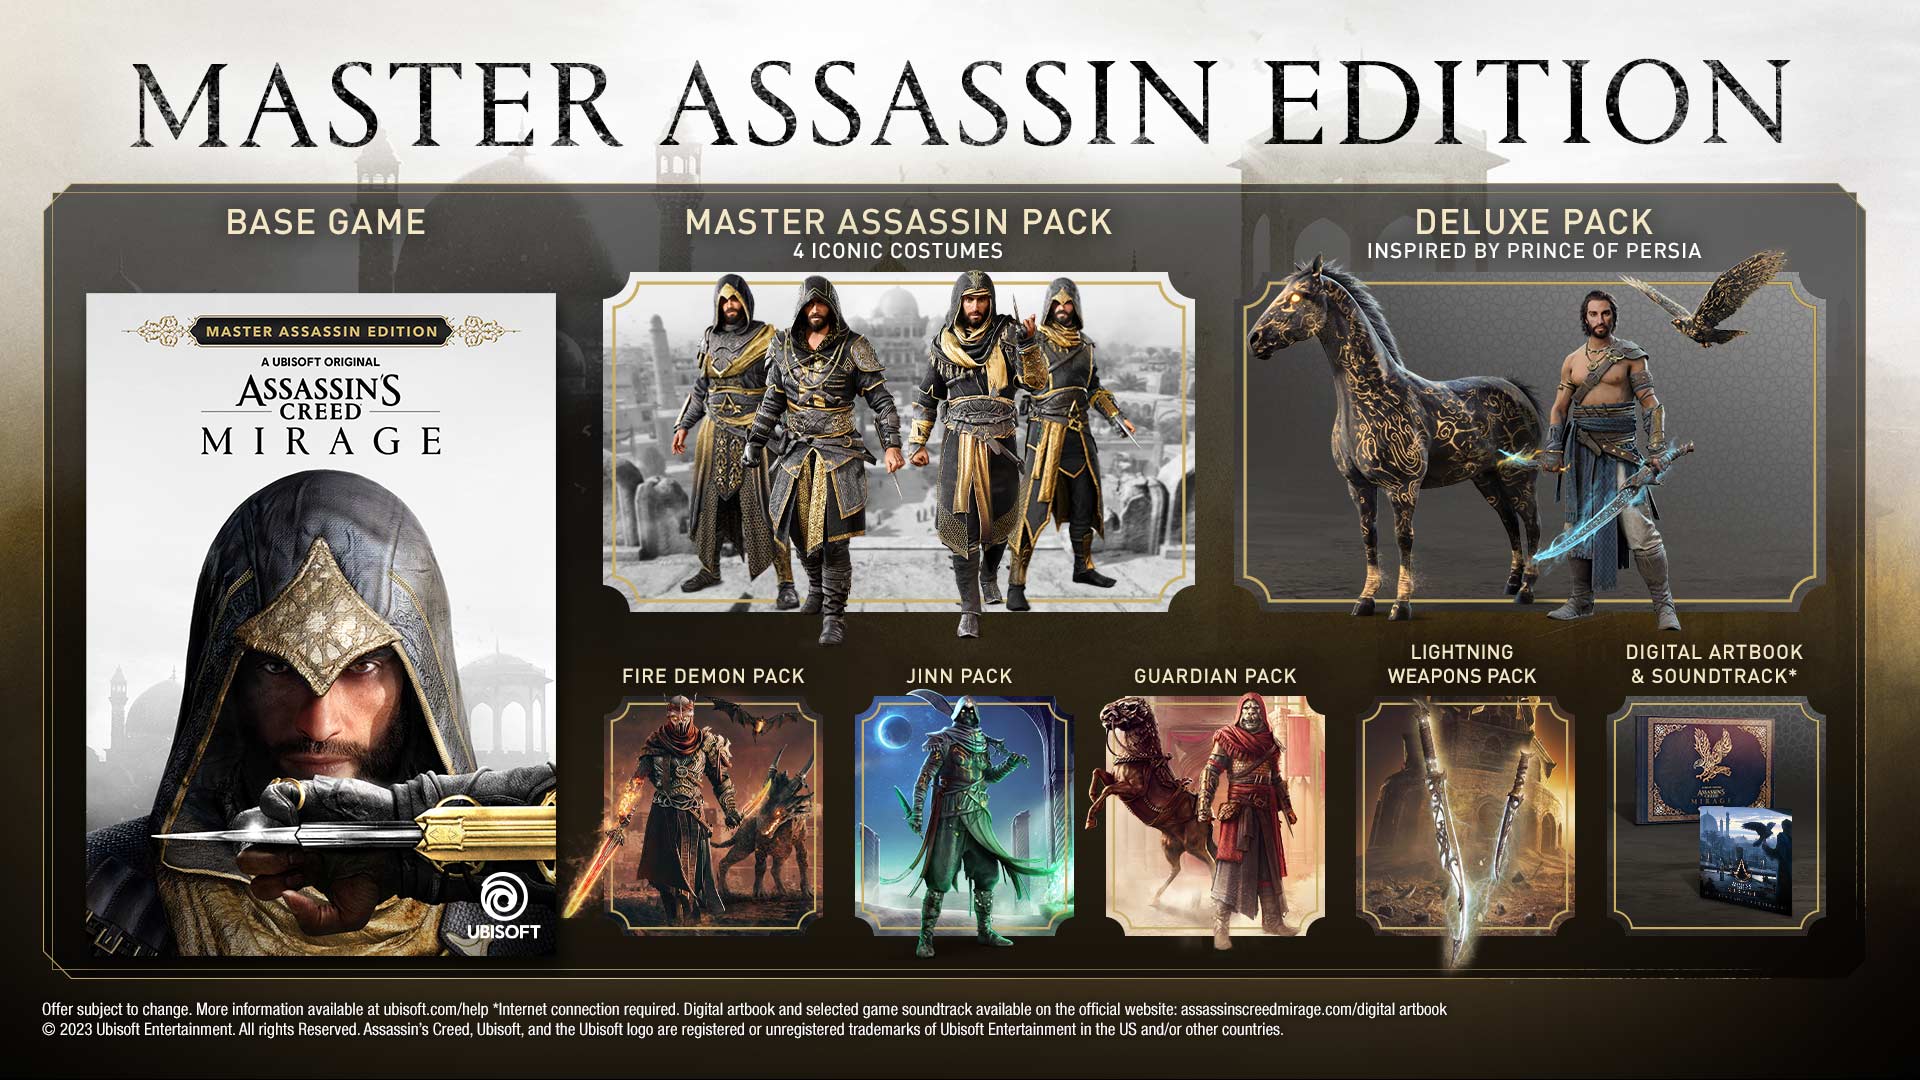 Buy Assassin's Creed Mirage Master Assassin Edition on PC & More